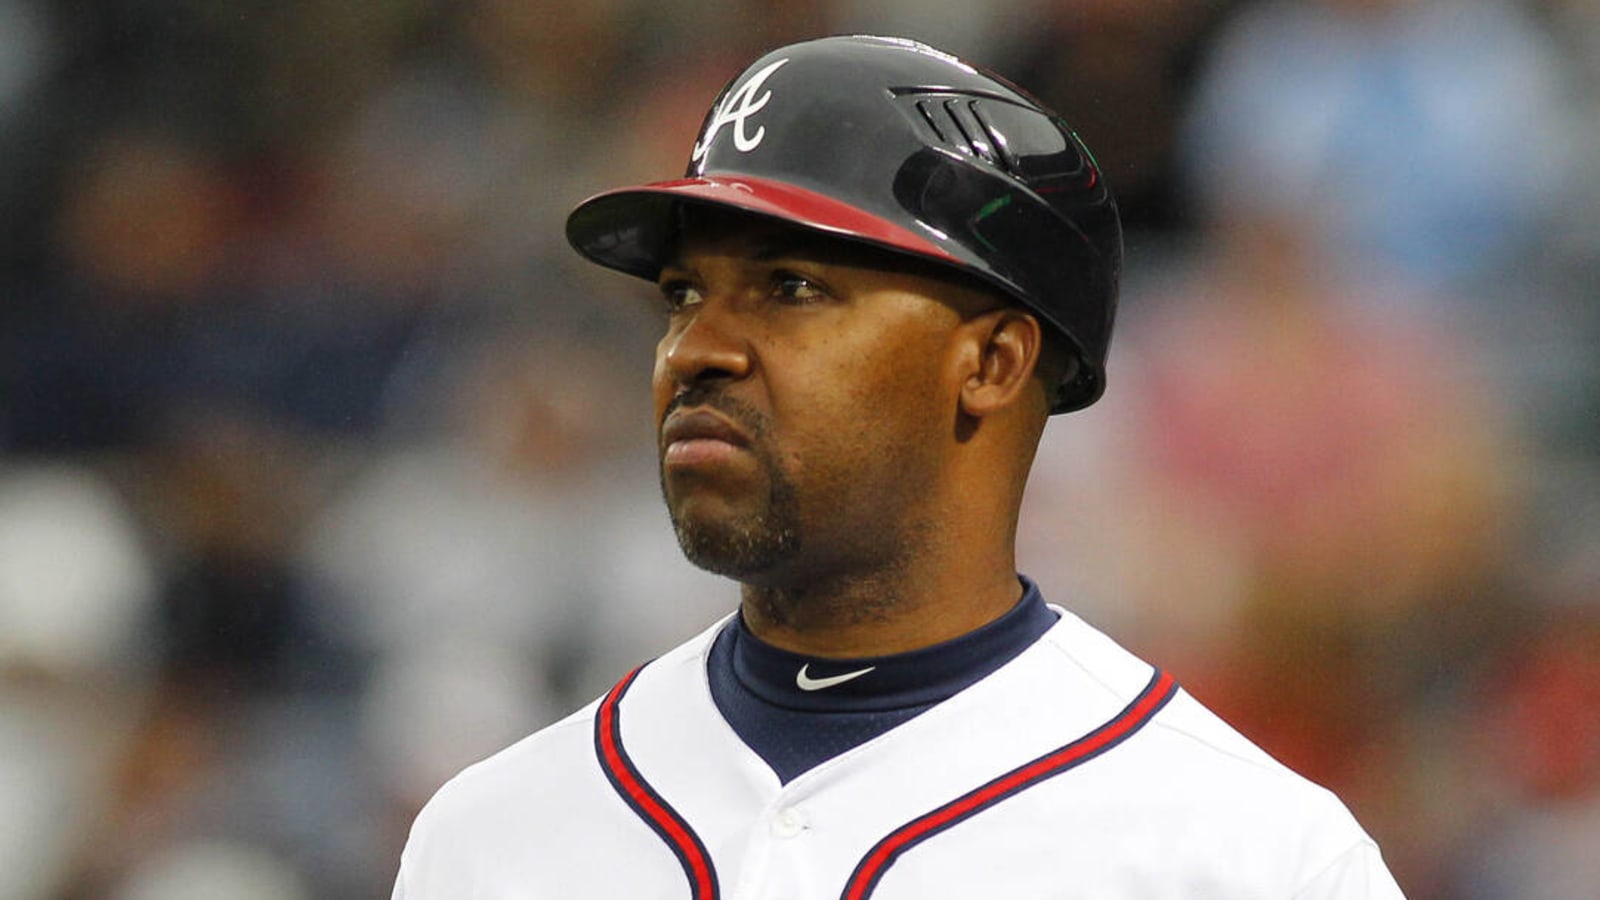 Braves special assistant to join Ron Washington on Angels coaching staff